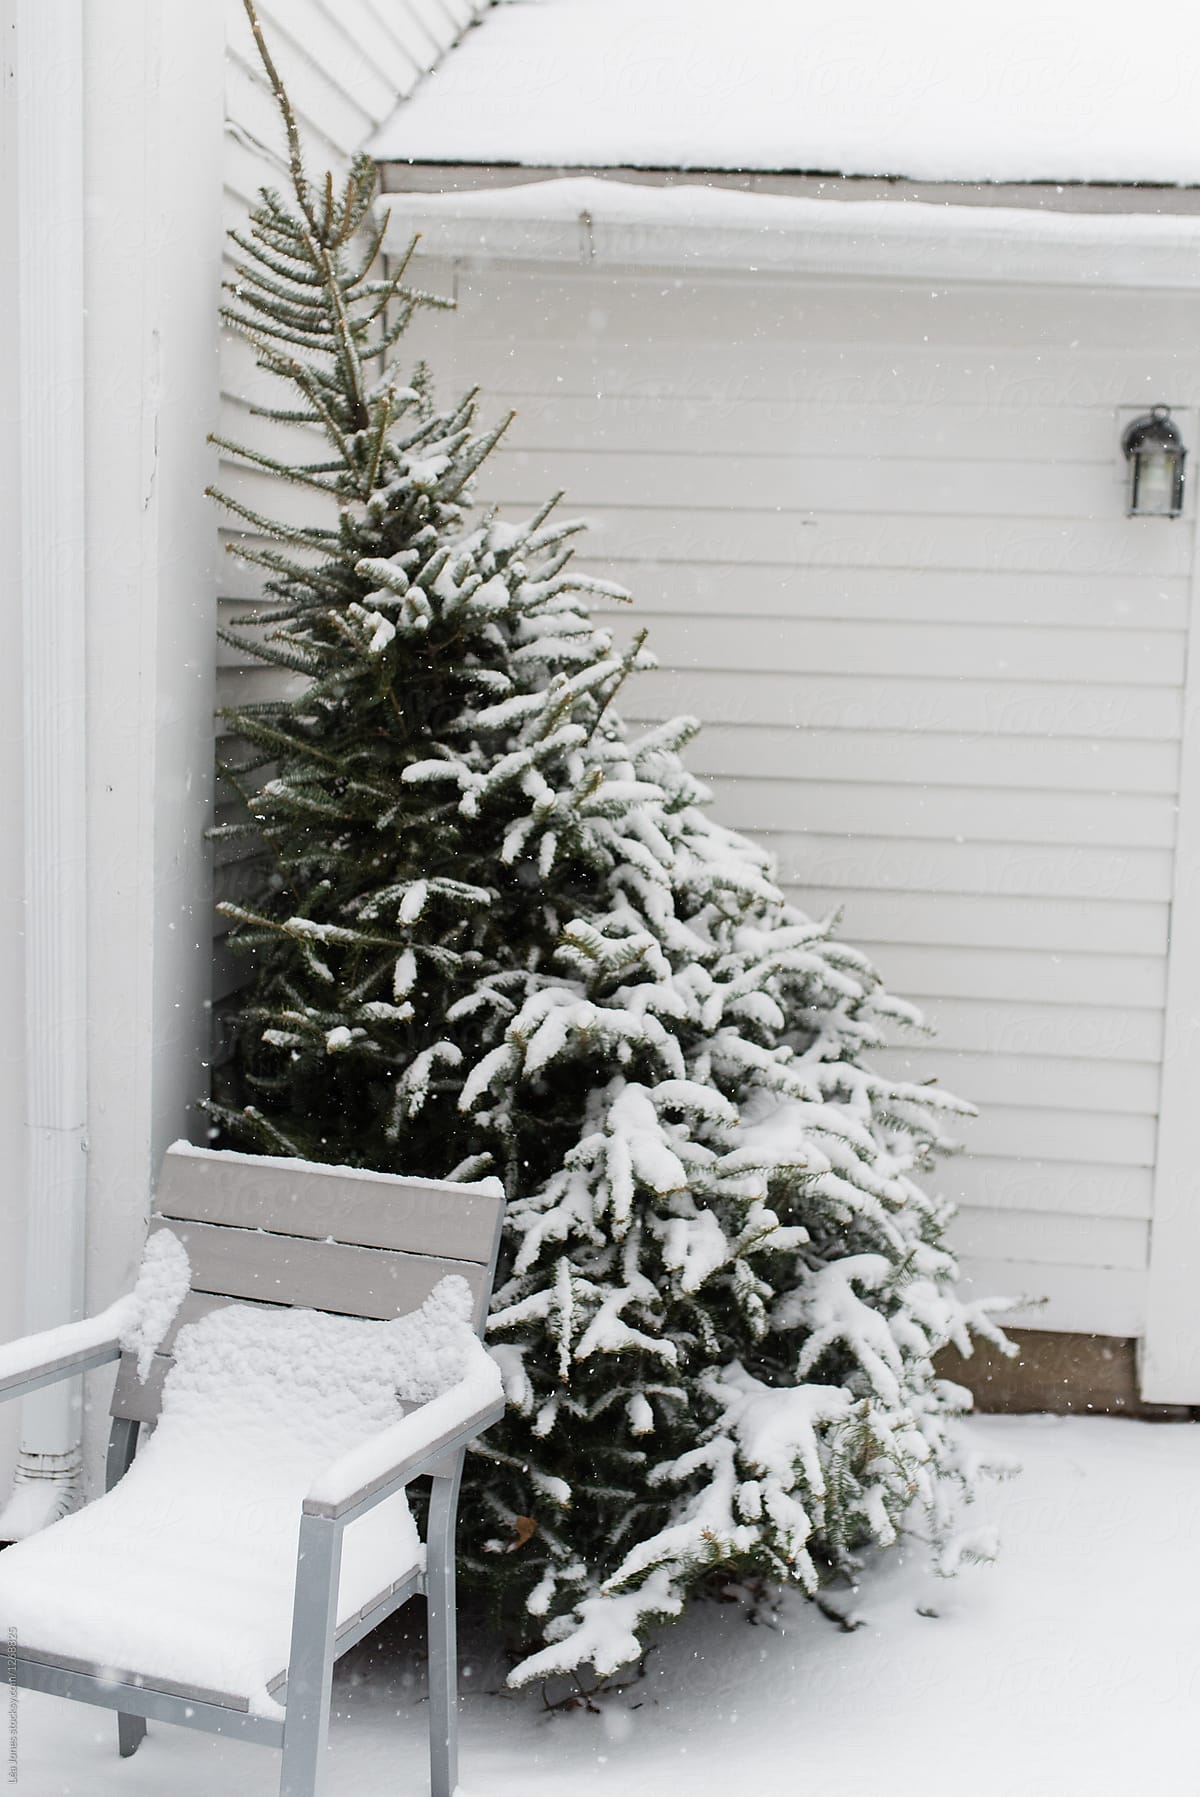 discarded Christmas tree with snow